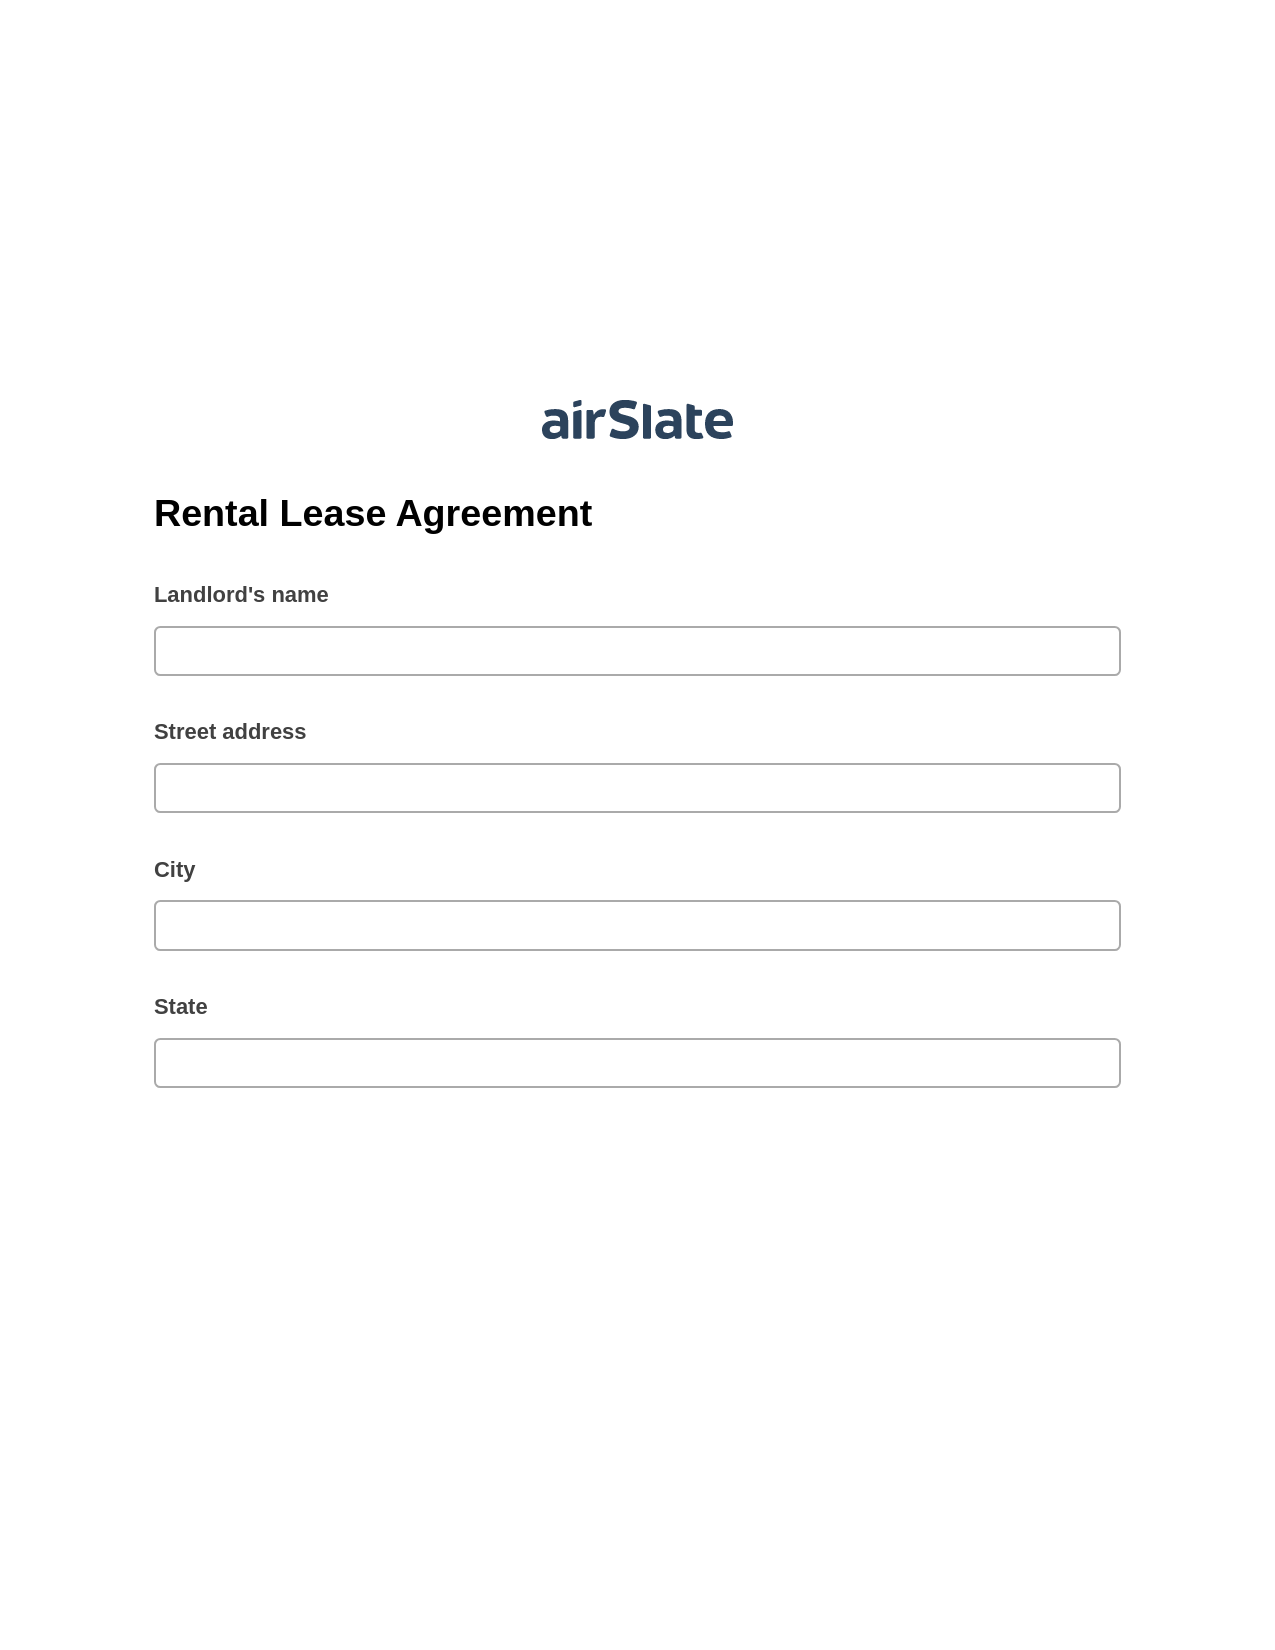 Multirole Rental Lease Agreement Pre-fill from Excel Spreadsheet Dropdown Options Bot, Unassign Role Bot, Archive to SharePoint Folder Bot